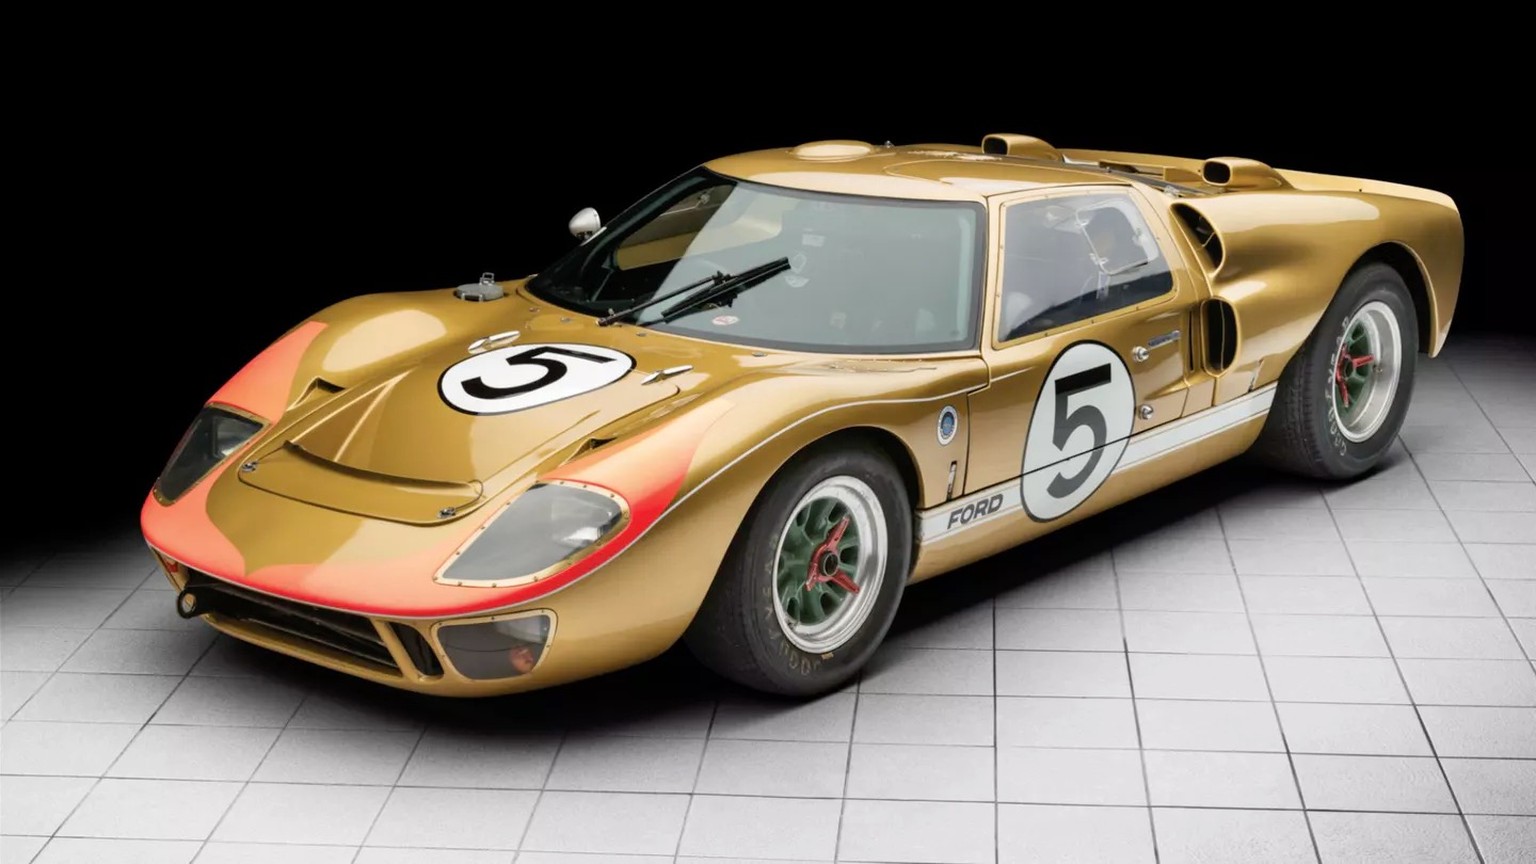 holman moody ford gt40 1966 le mans auto ford v ferrari https://www.hemmings.com/blog/2018/06/19/part-of-fords-1966-le-mans-podium-sweep-this-gt40-mk-ii-could-set-an-auction-record/